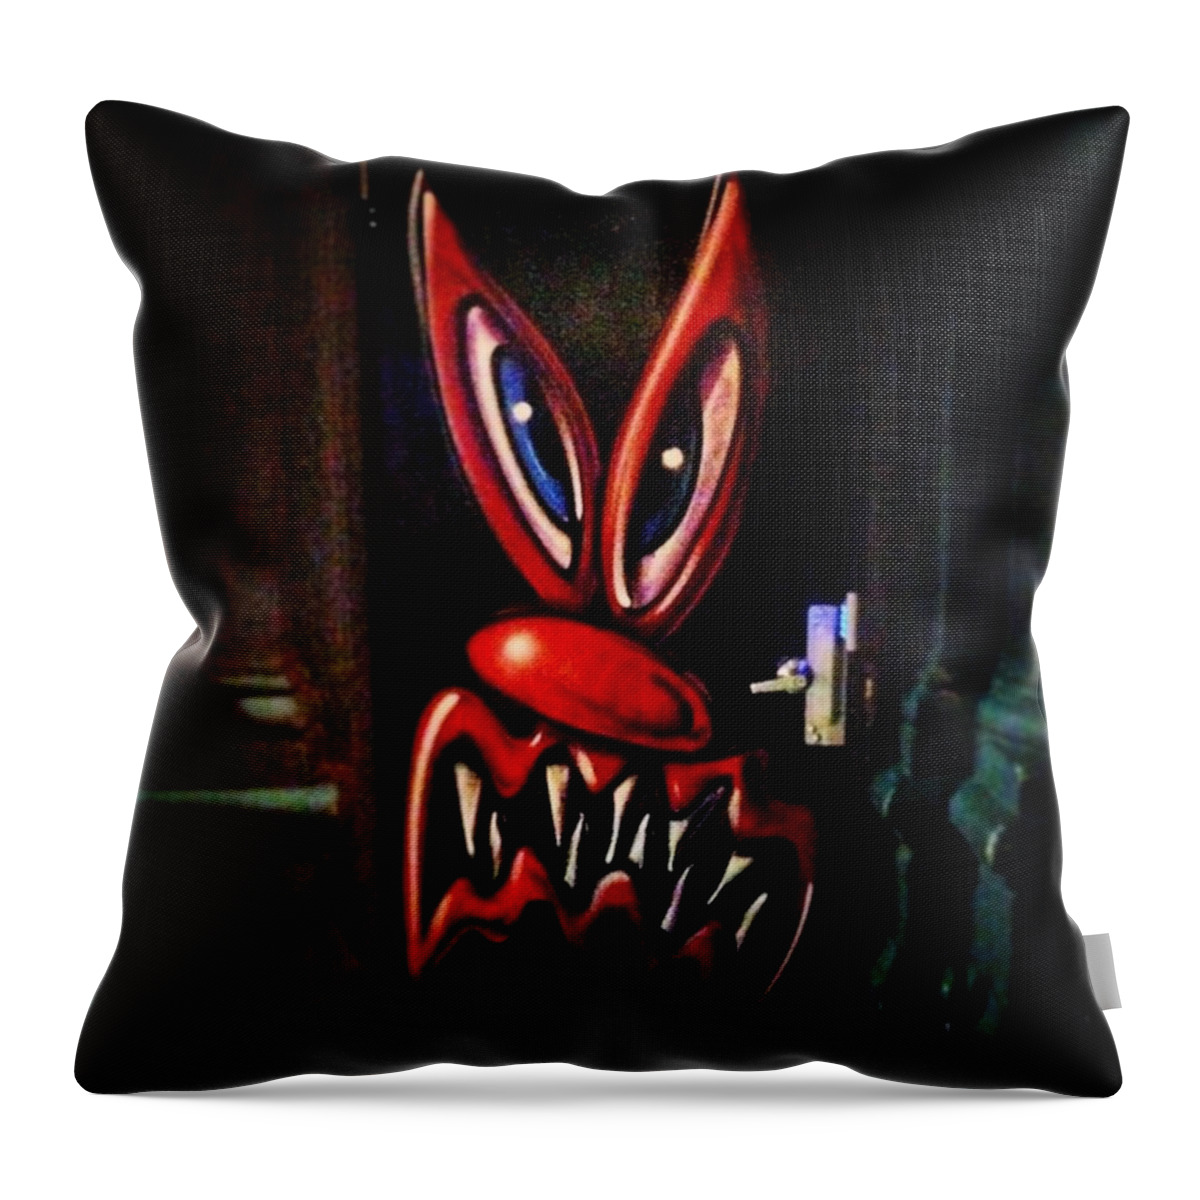 Kennyscharf Throw Pillow featuring the photograph Angry Door by Allan Piper